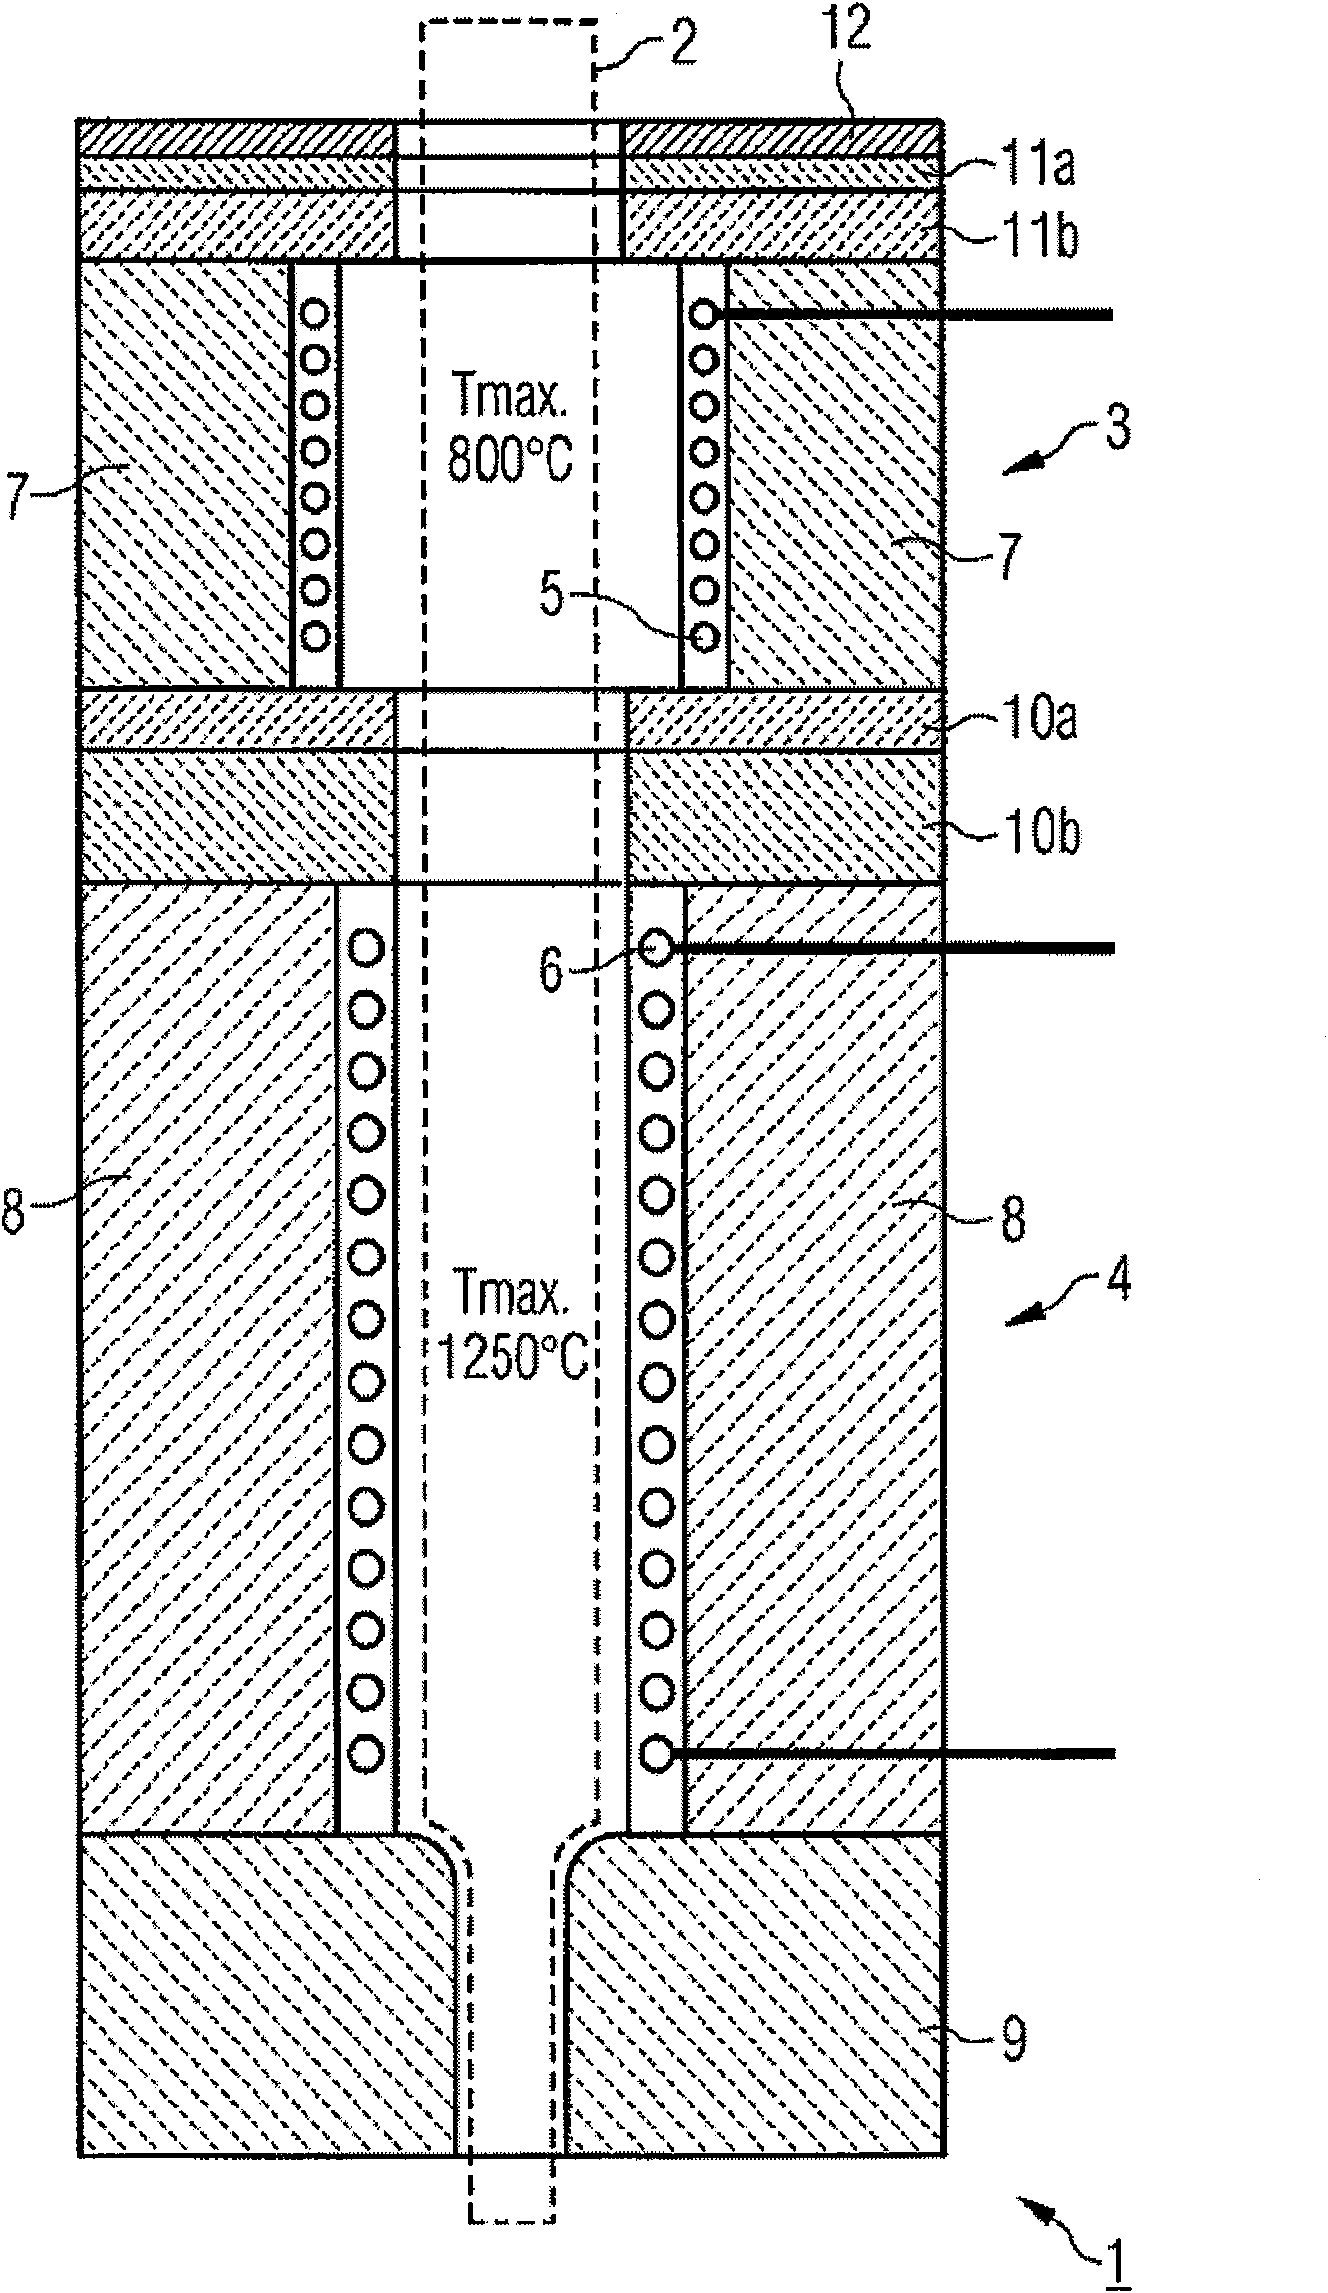 Method and device for determining the phosphorus content of an aqueous sample